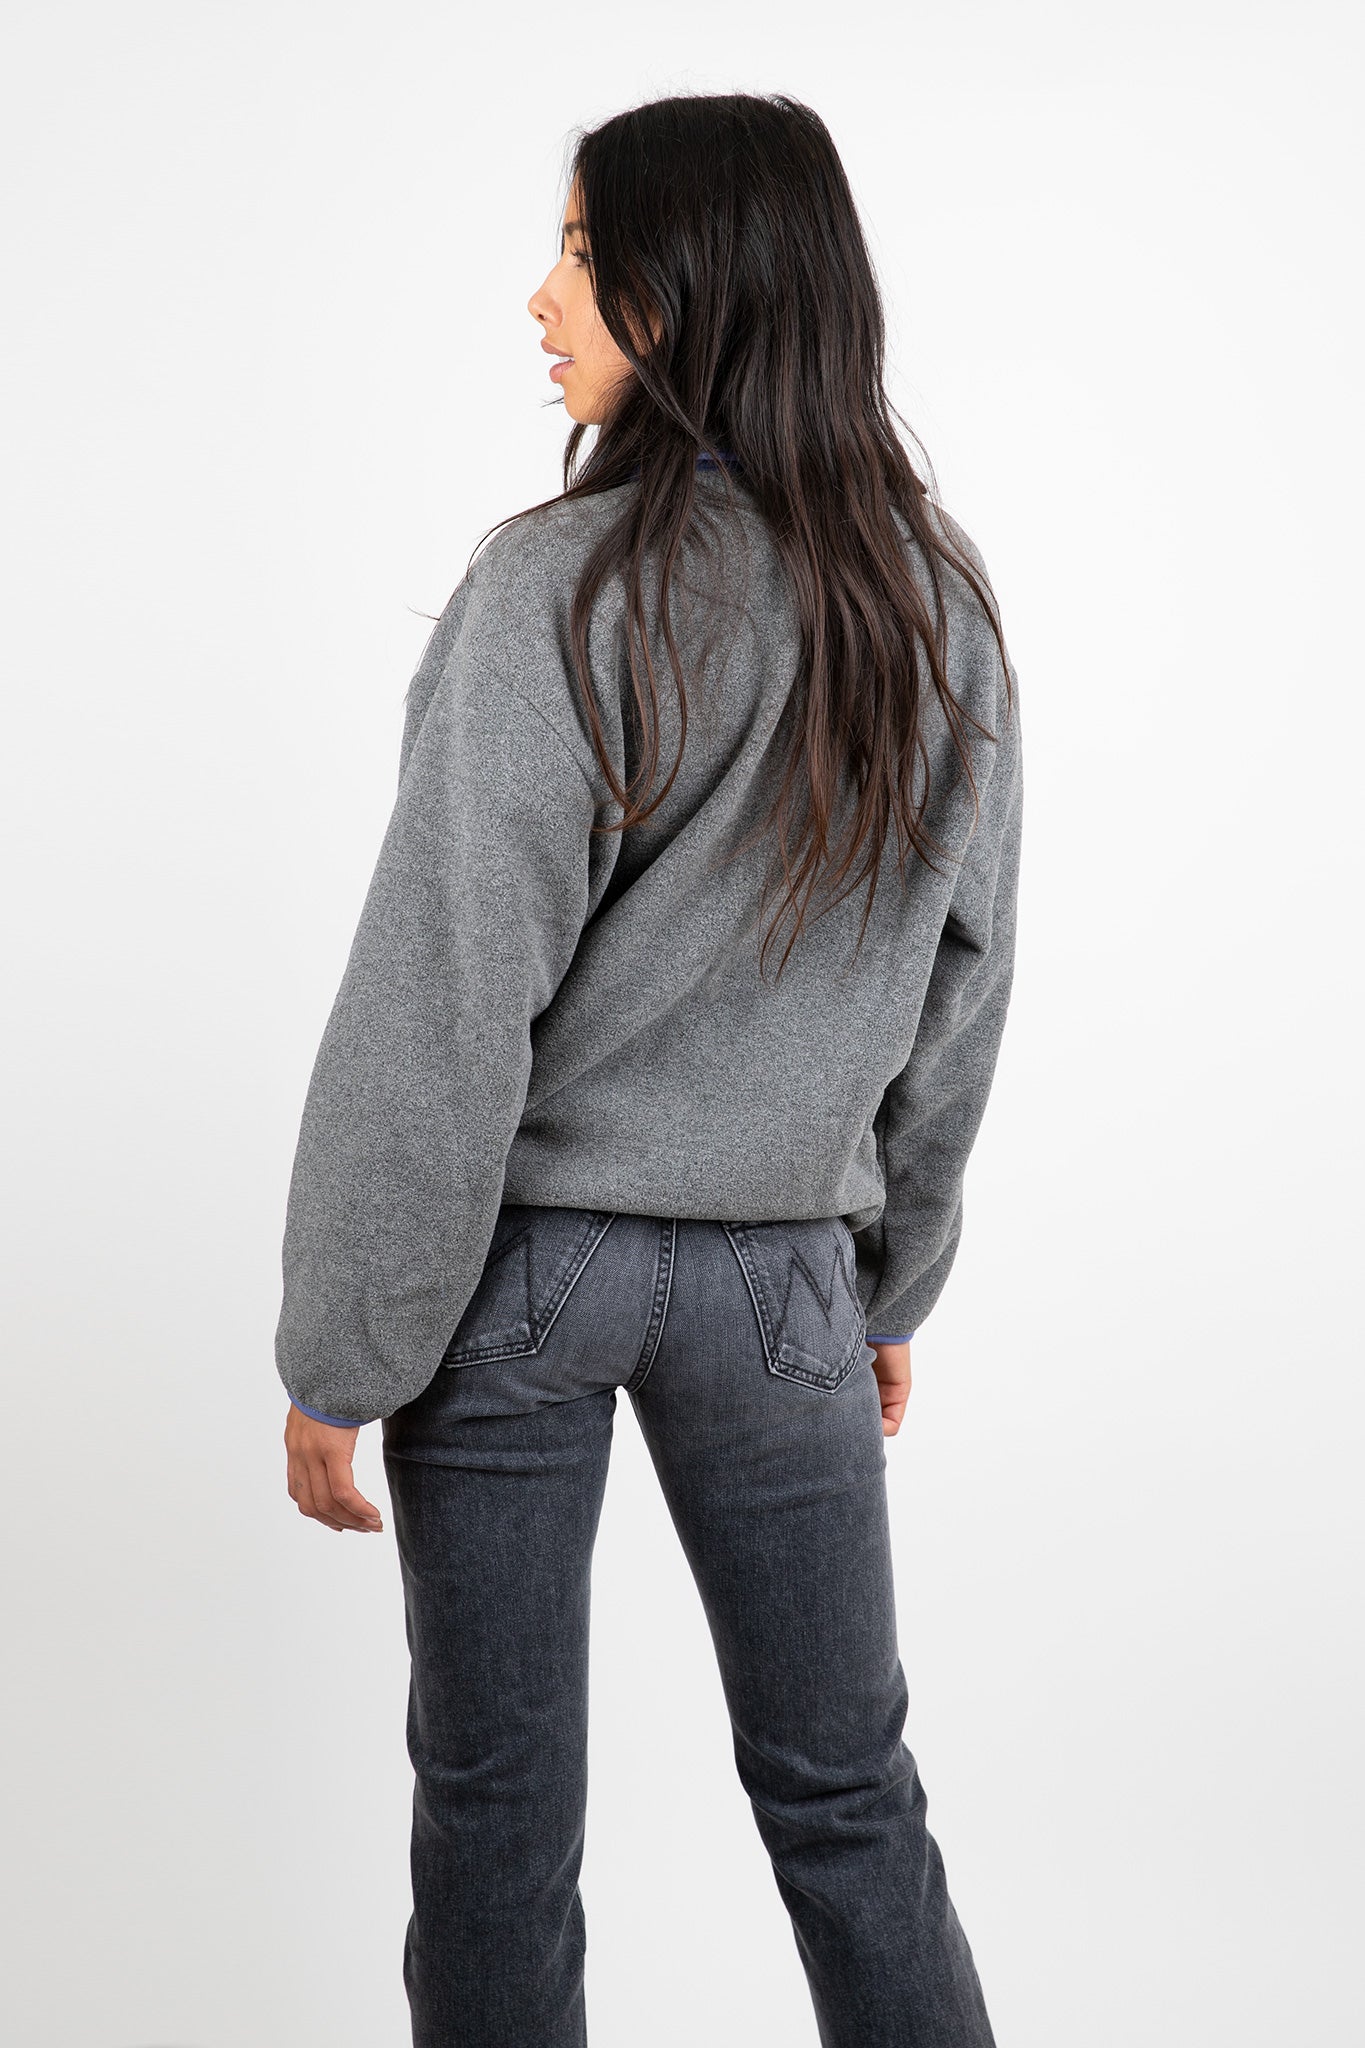 patagonia × URBAN OUTFITTERS SYNCHILLA-